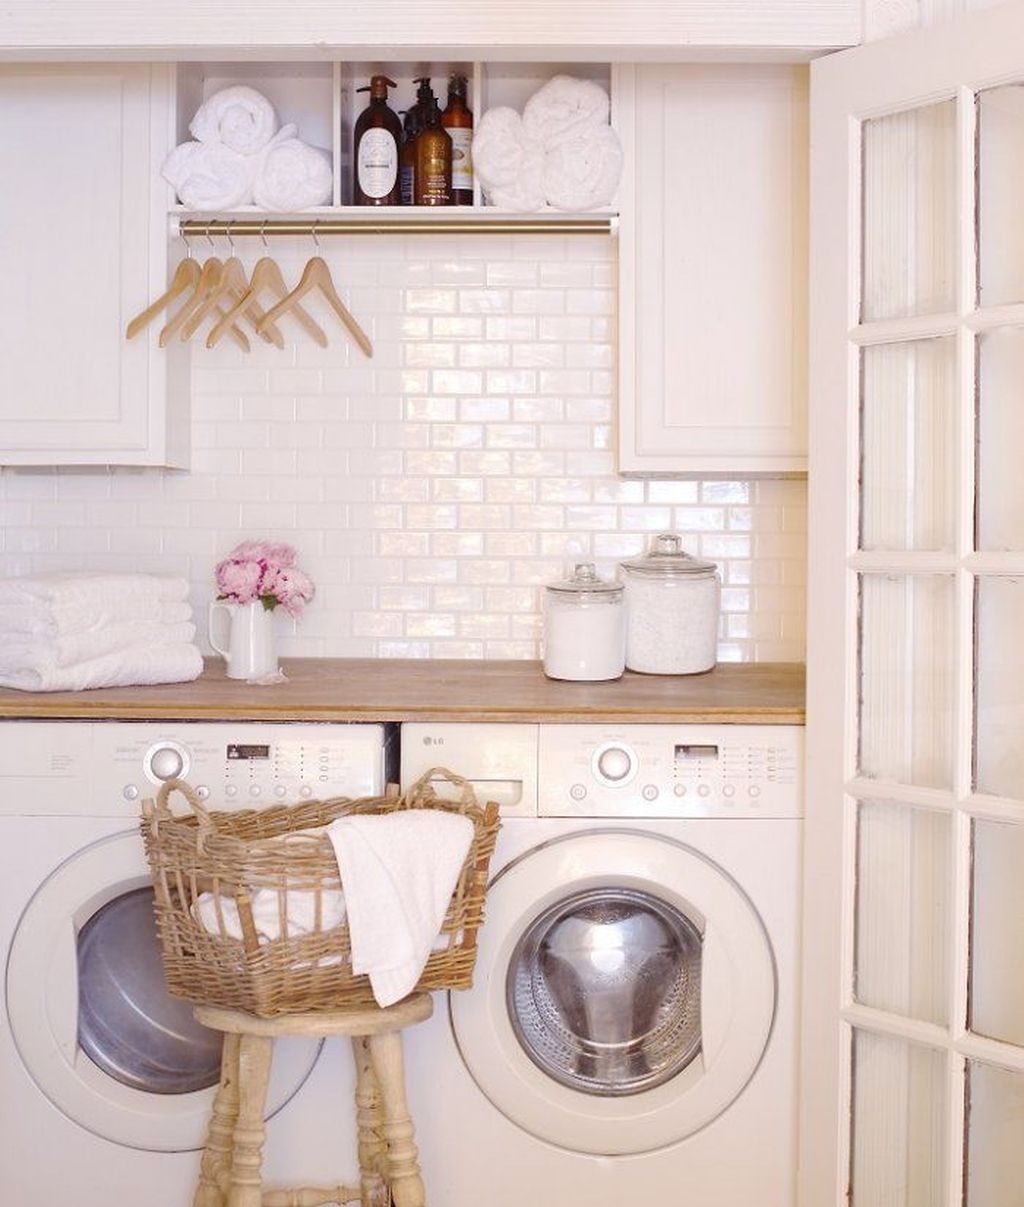 Inspiring Laundry Room Design With French Country Style 20